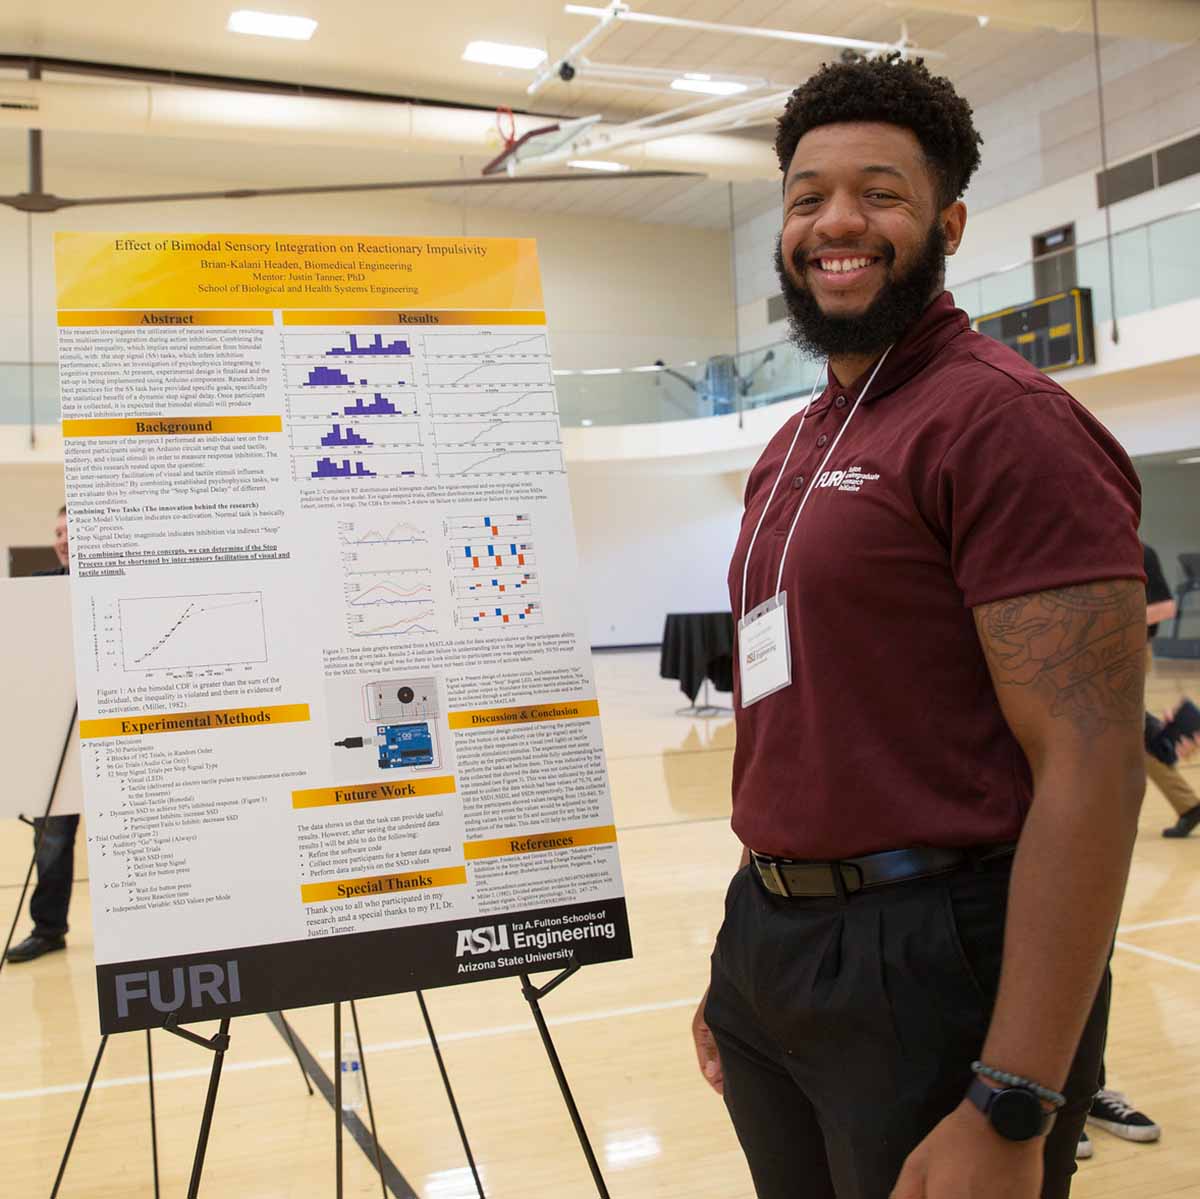 A student stands by his poster, smiling for the camera, at the FURI symposium